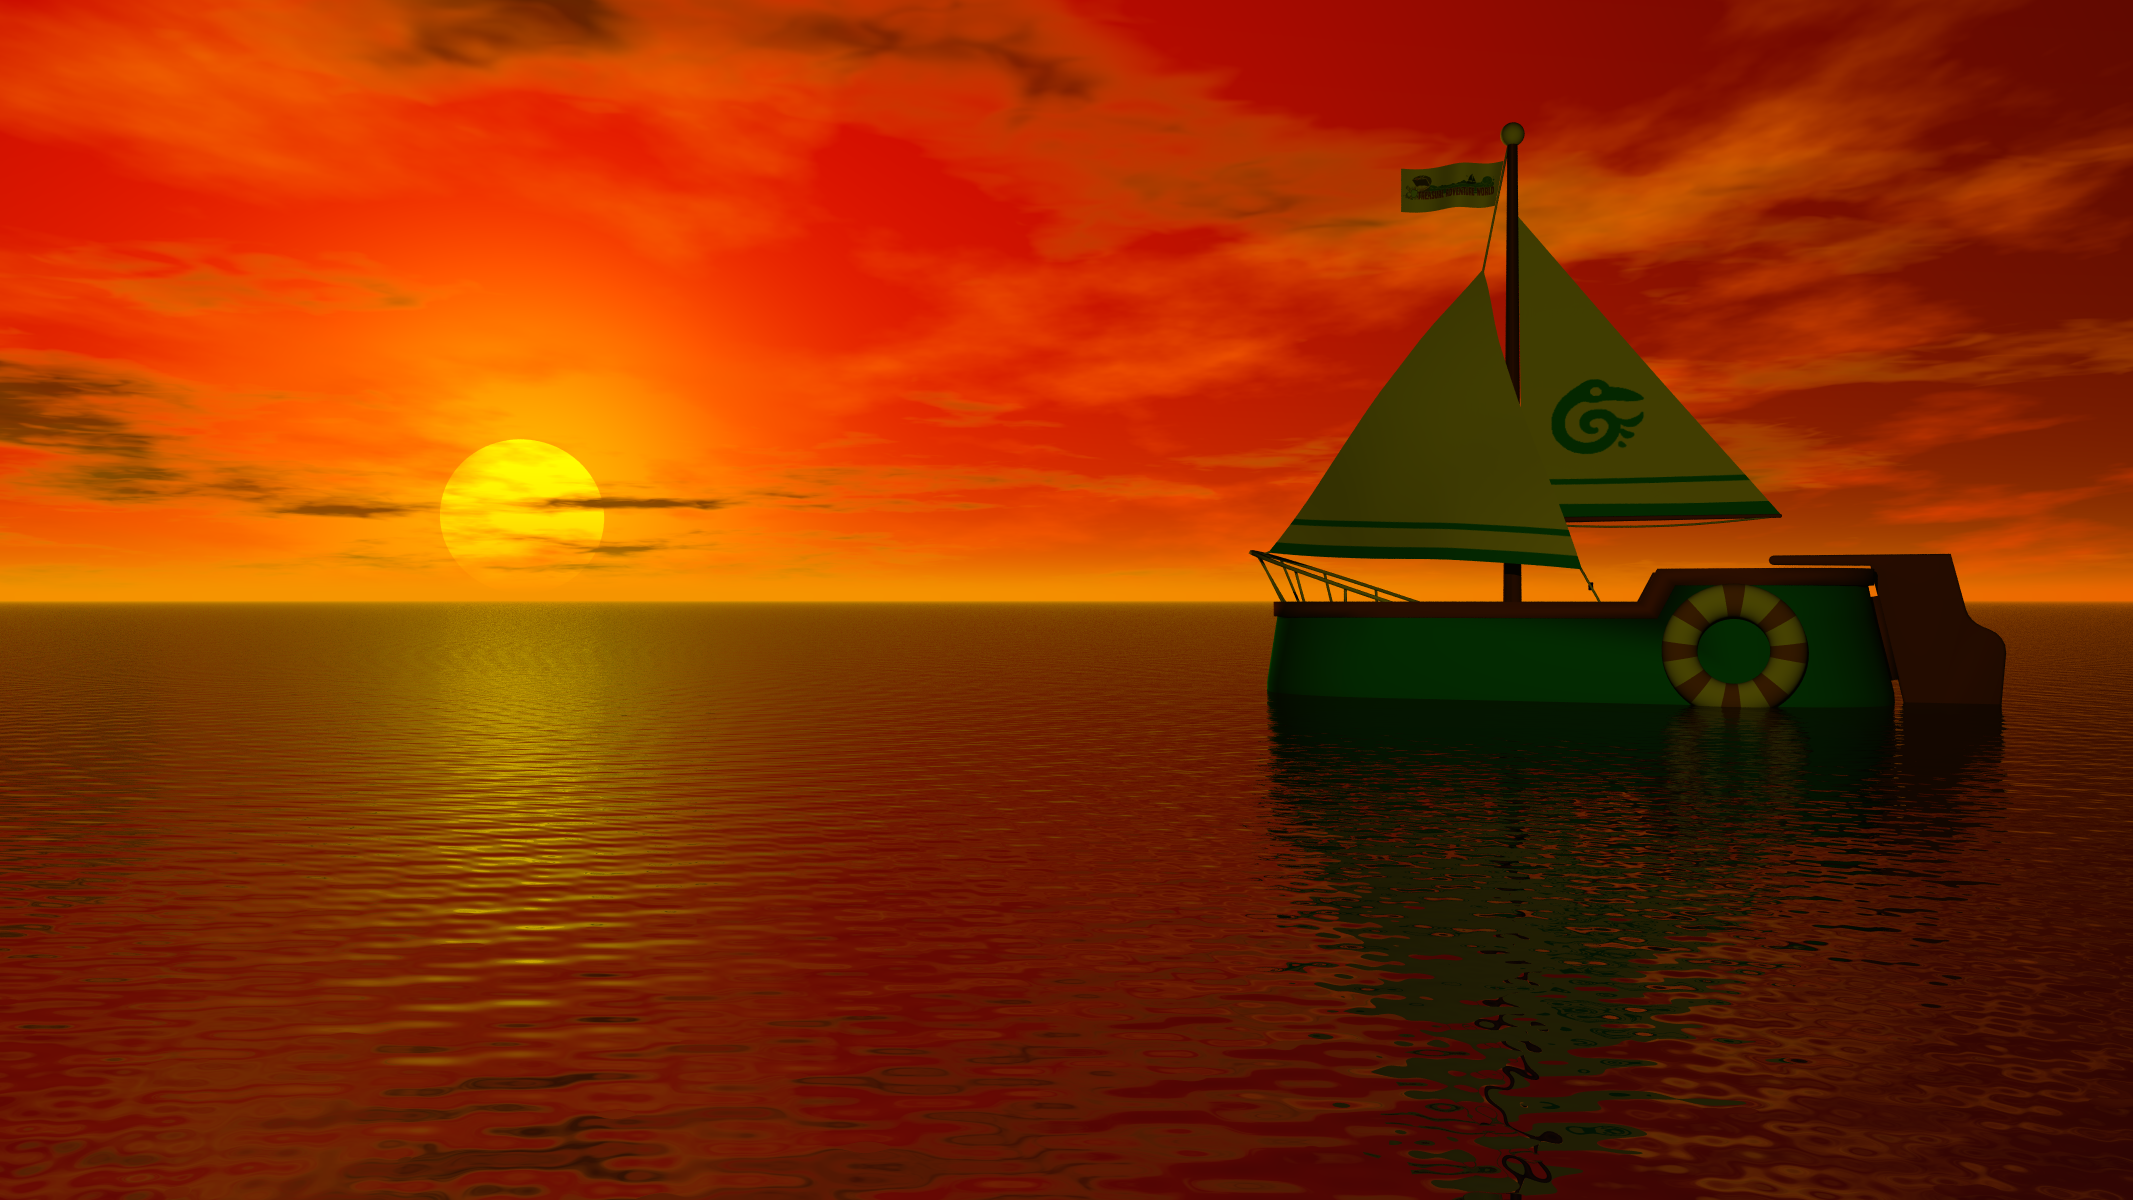 Fjord pilot Beskrivelse A Red Sky At Night, A Sailor's Delight by 777eza on DeviantArt